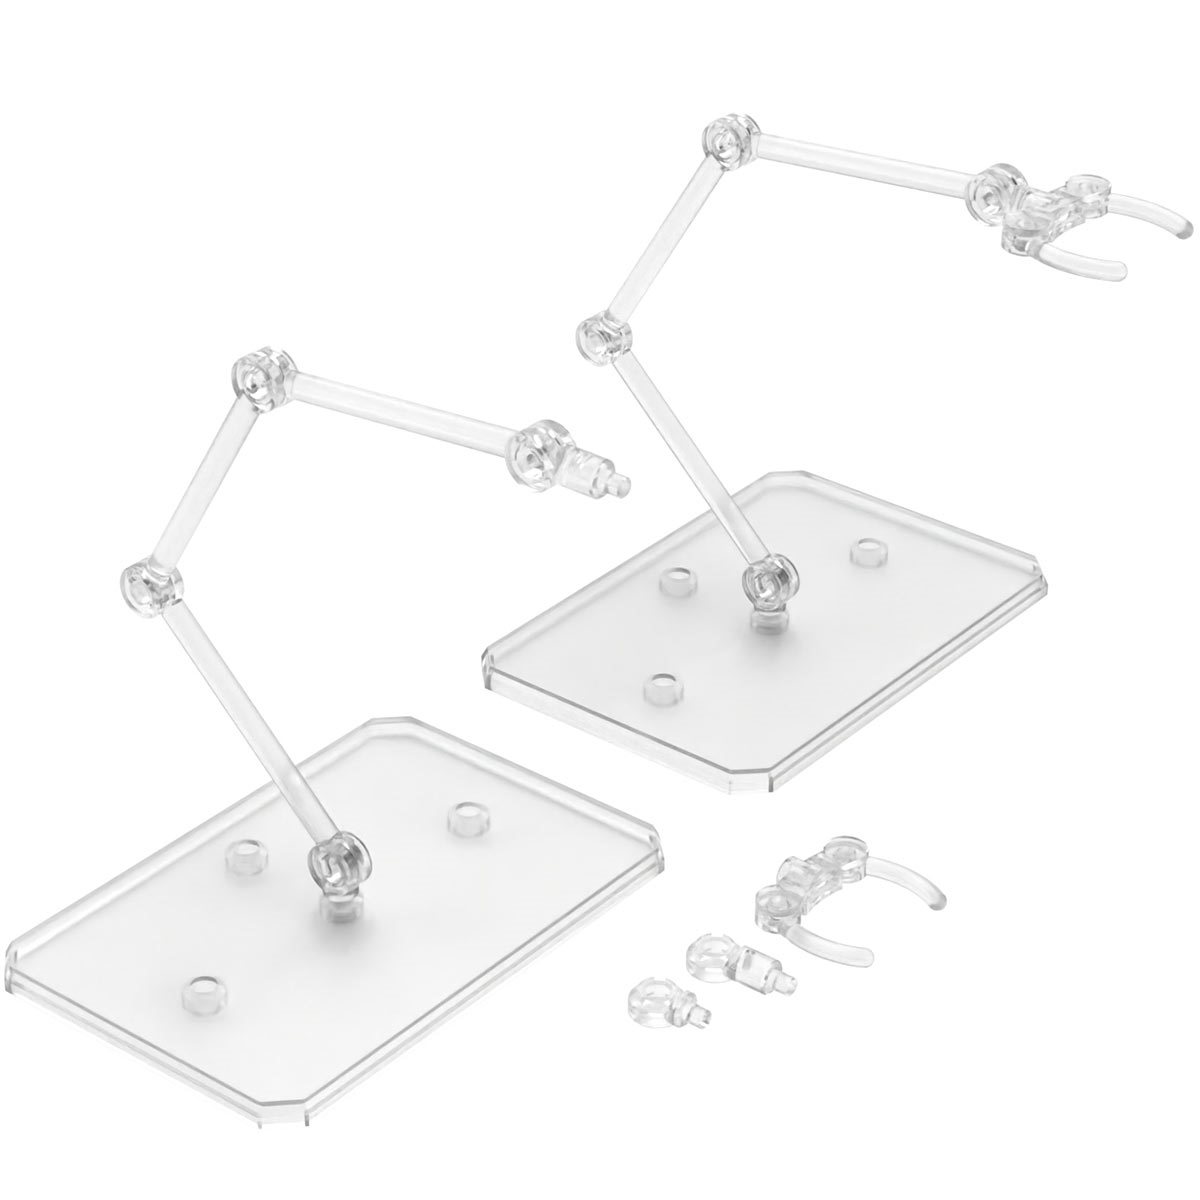 Action Base 6 Clear Model Display Stand - Entertainment Earth